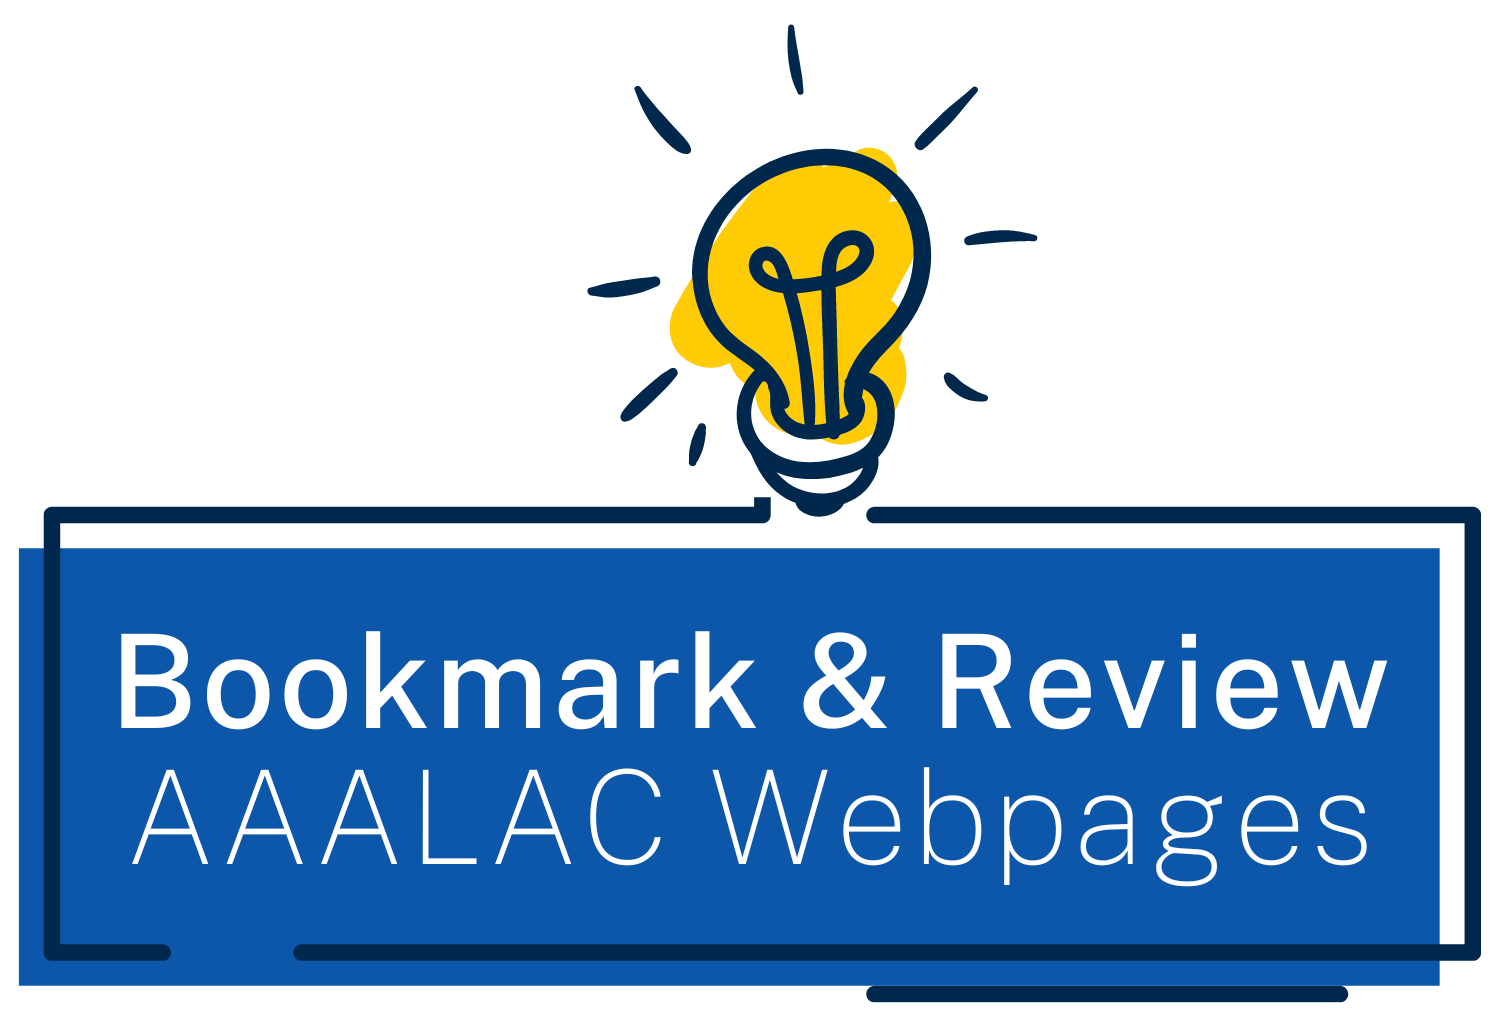 Callout box with lightbulb and text that says "Bookmark &amp; Review AAALAC webpages"